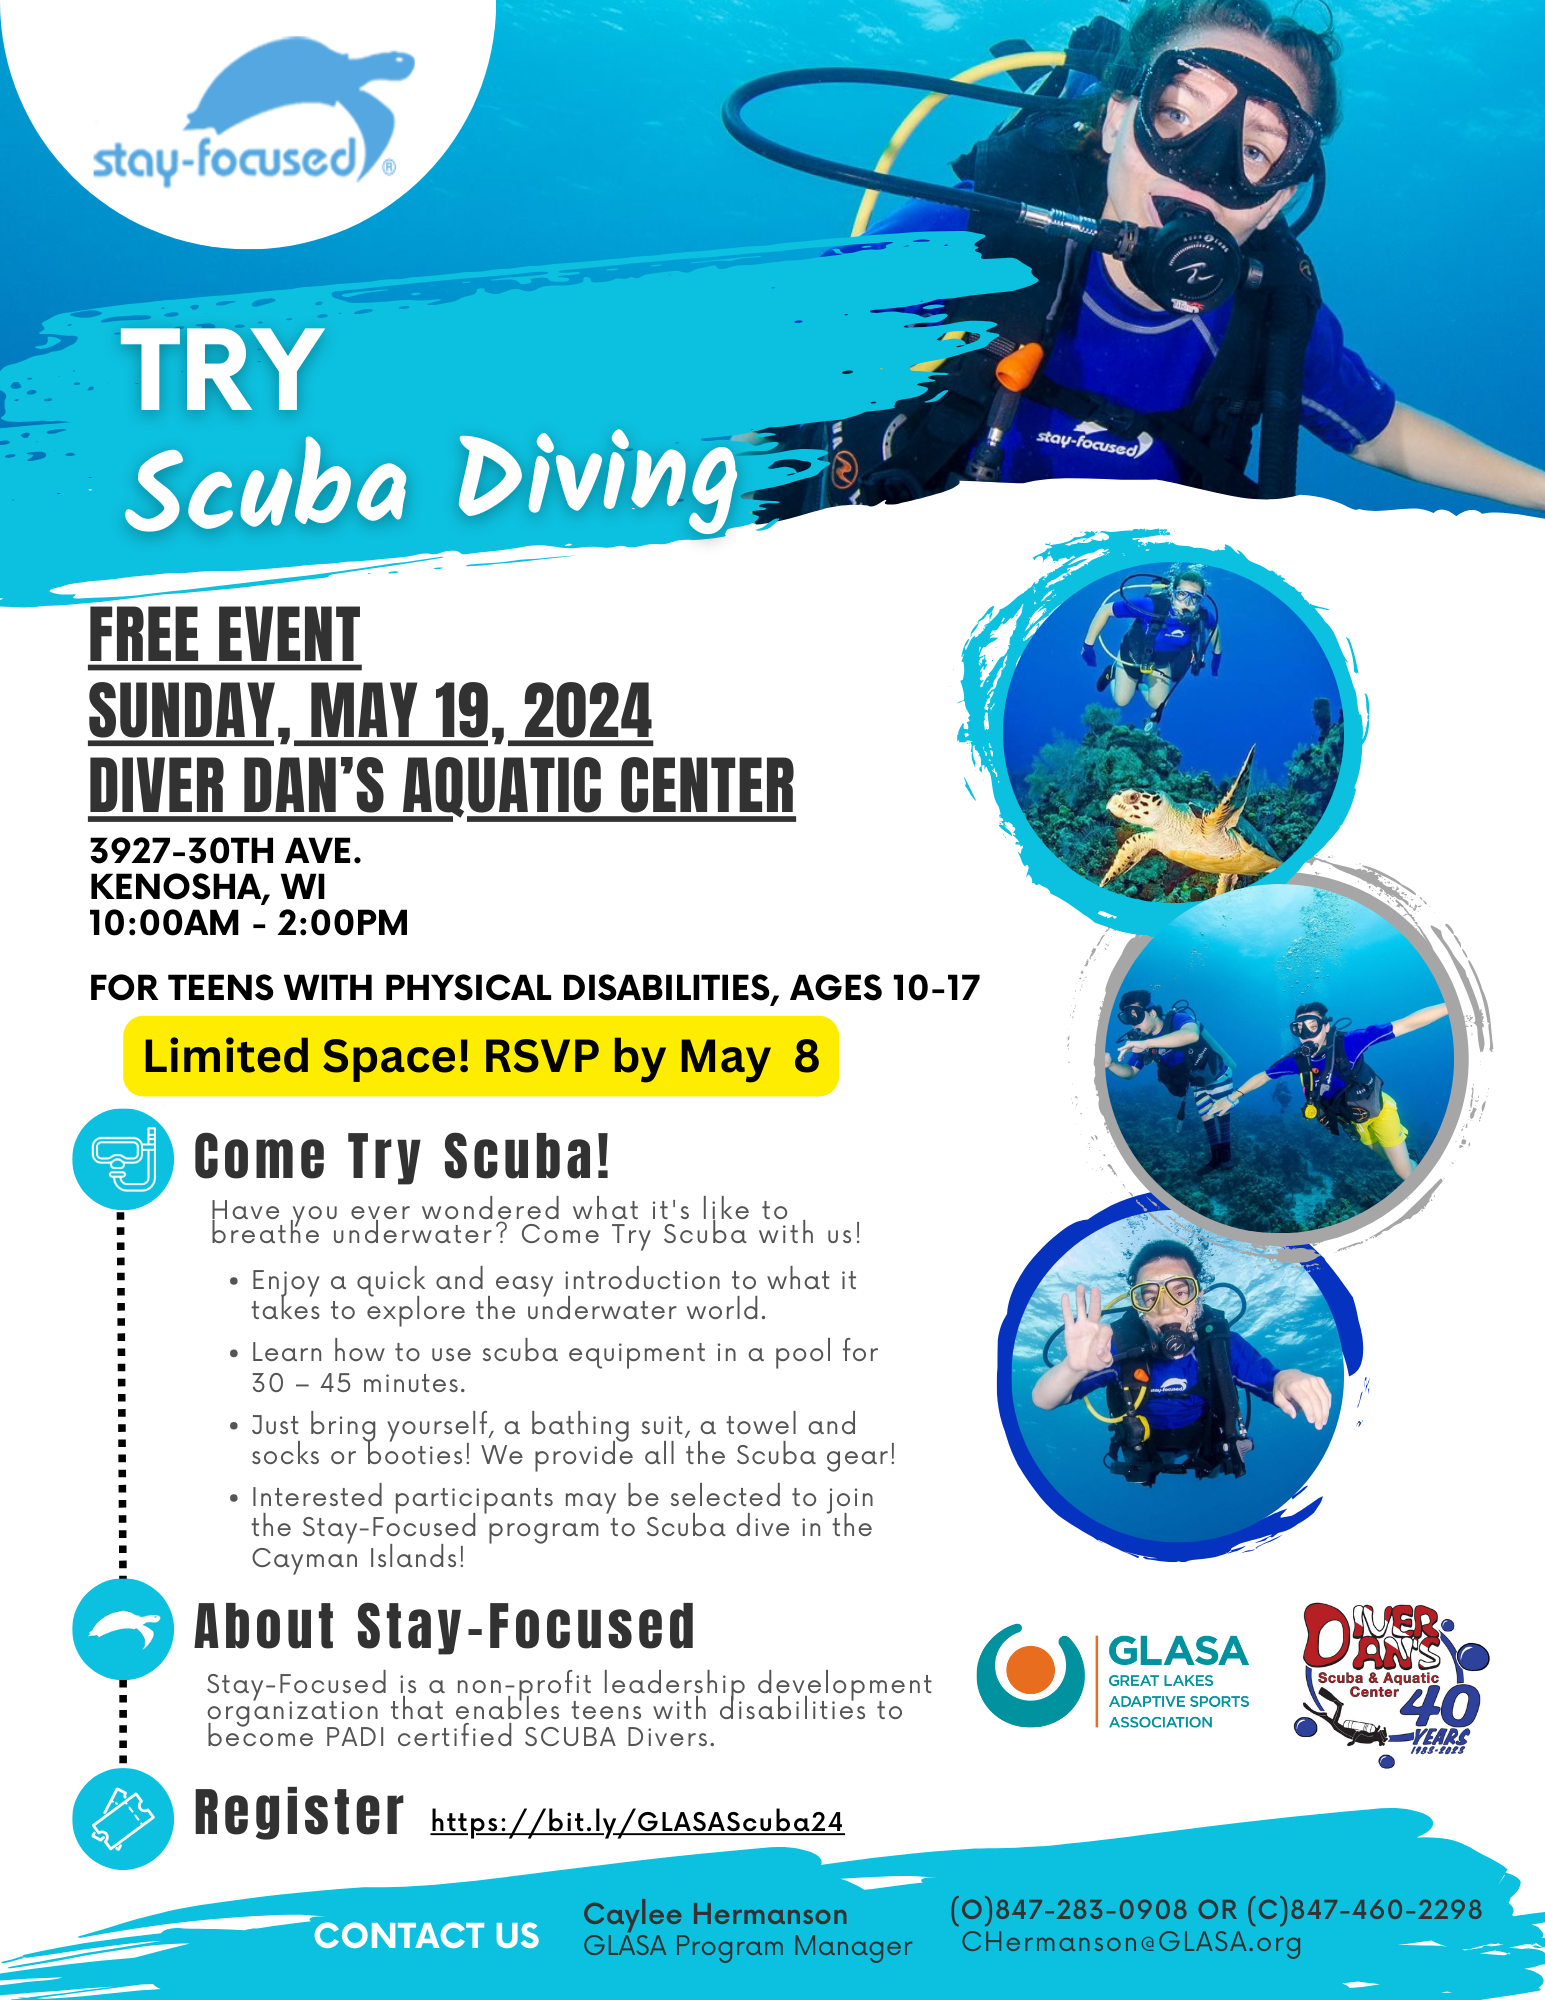 Flyer with information about Scuba Diving Clinic.